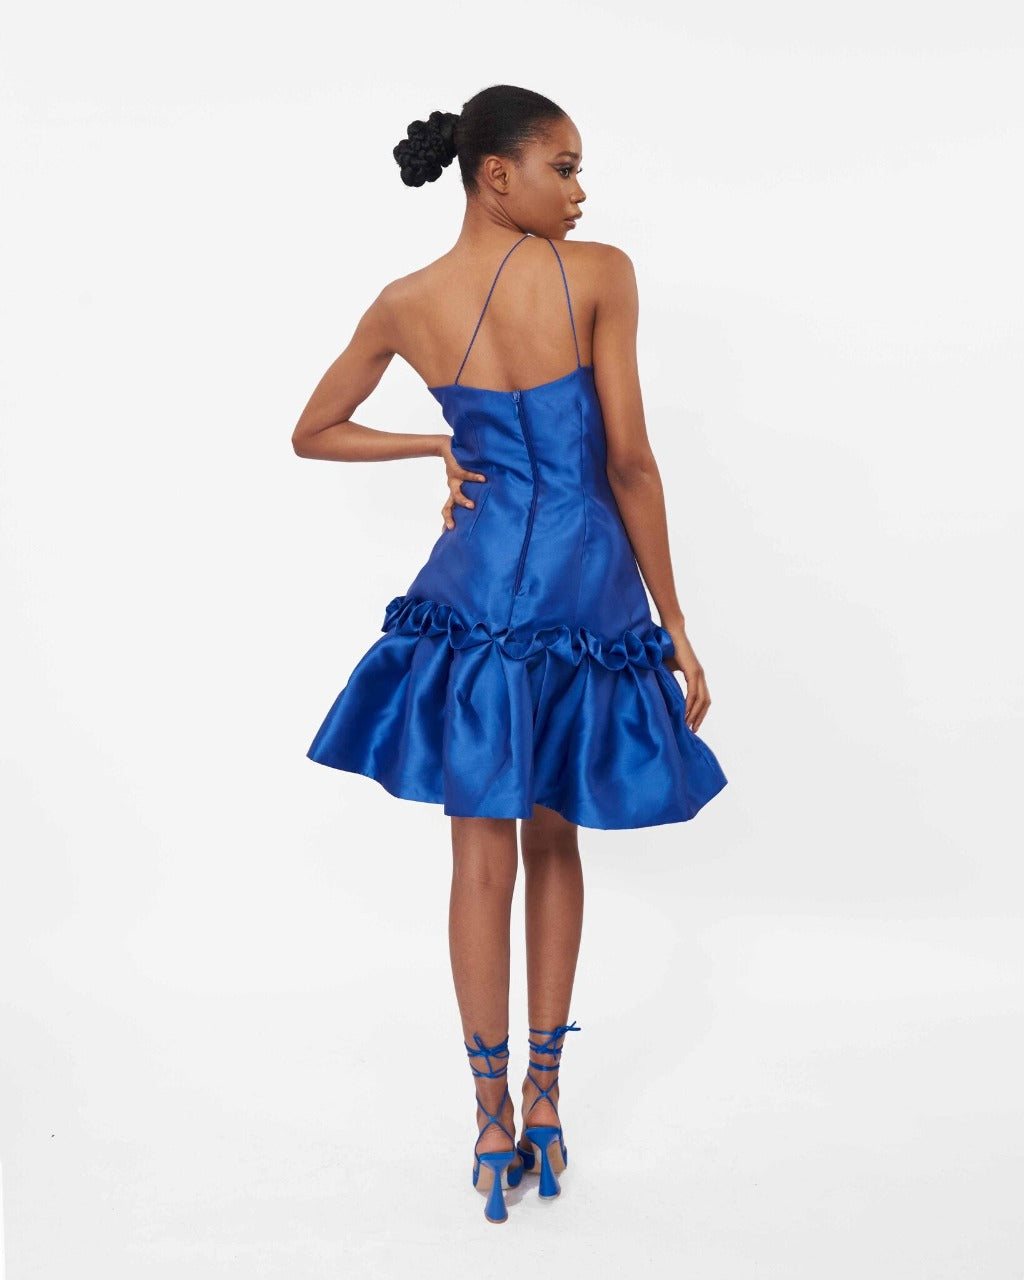 The back of a model wearing a one-shoulder blue dress with drop waist ruffle detailing